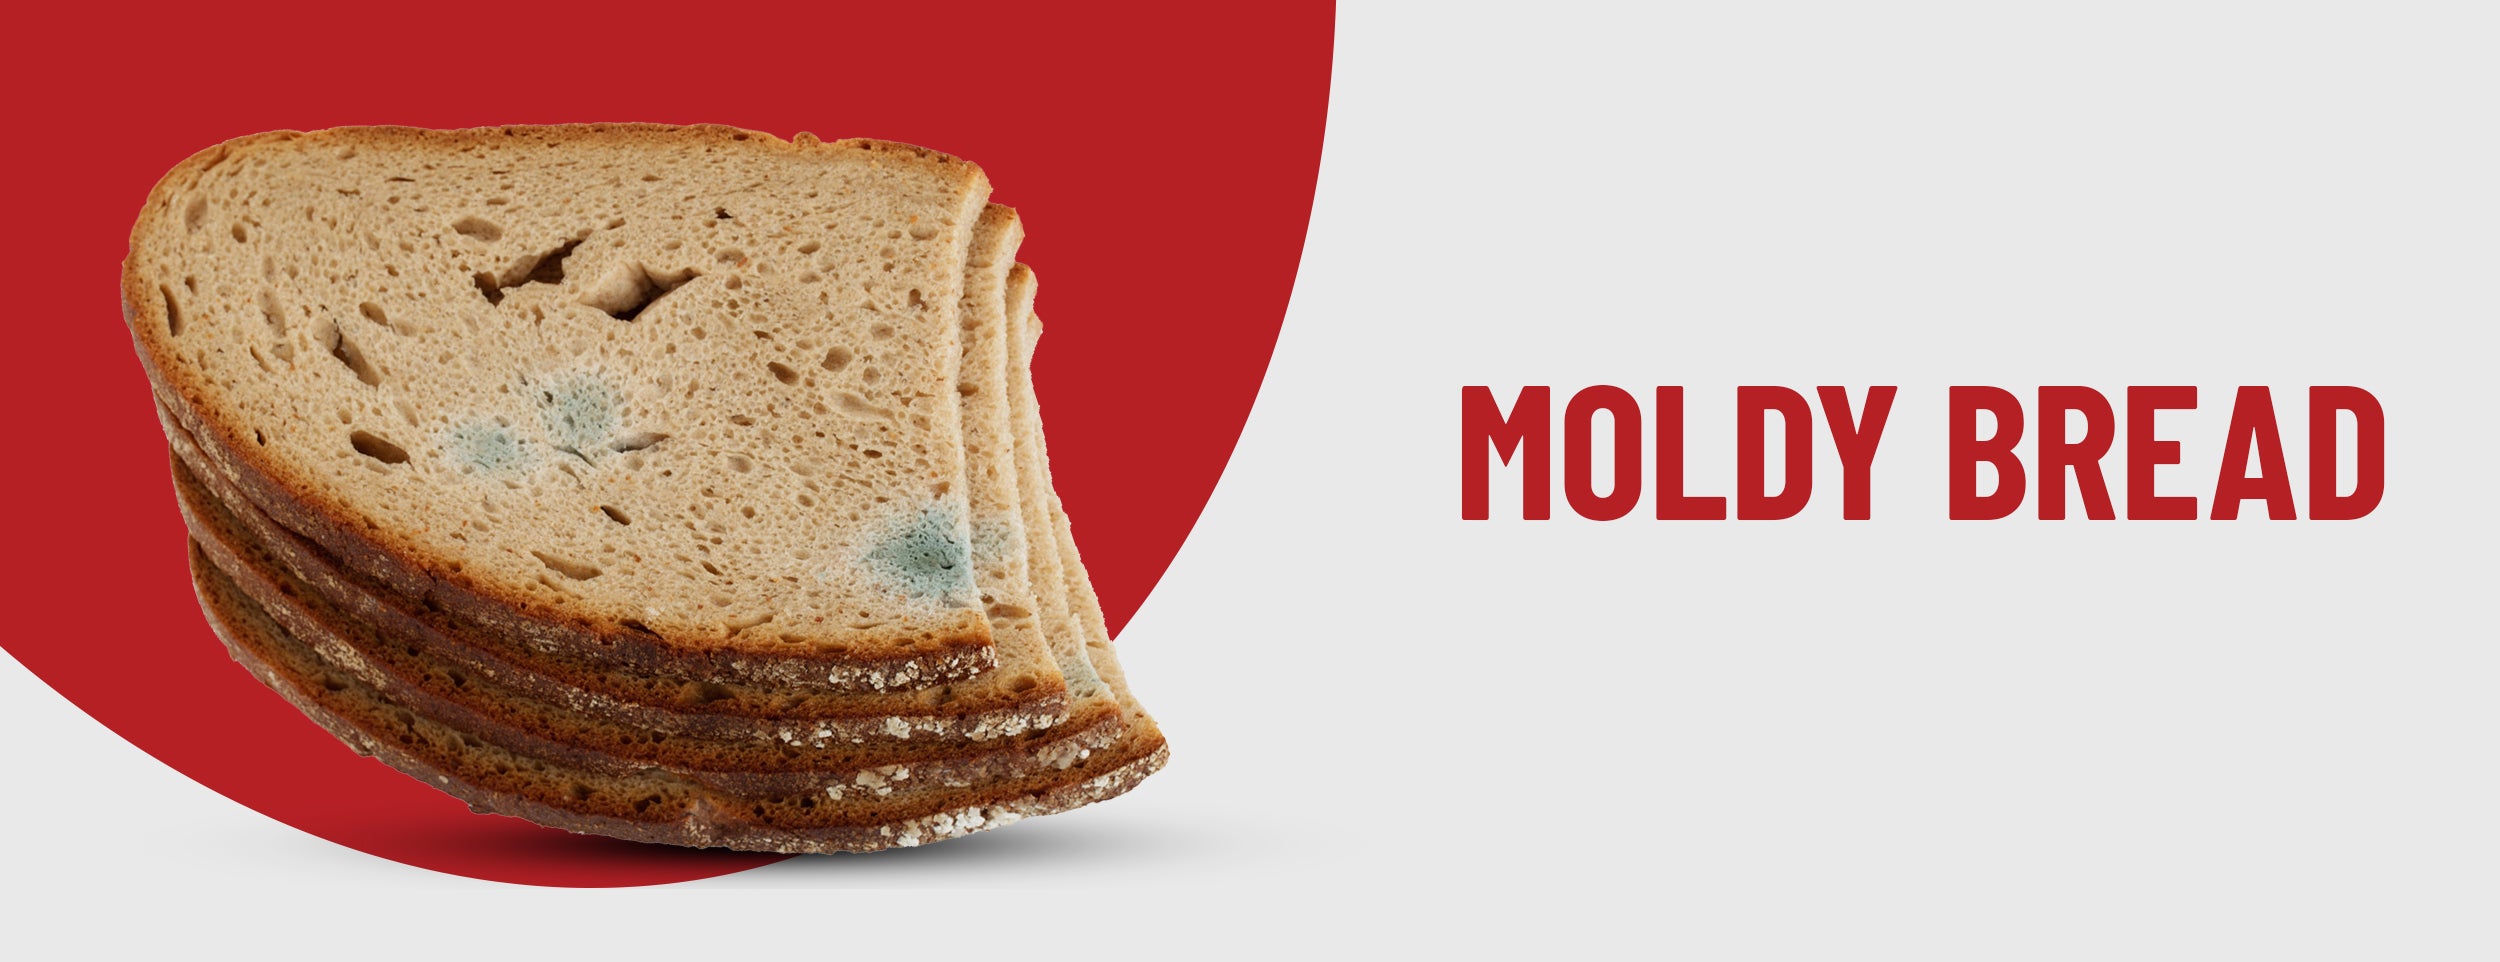 Moldy bread is used as a wound disinfectant in Egyptian cuisine